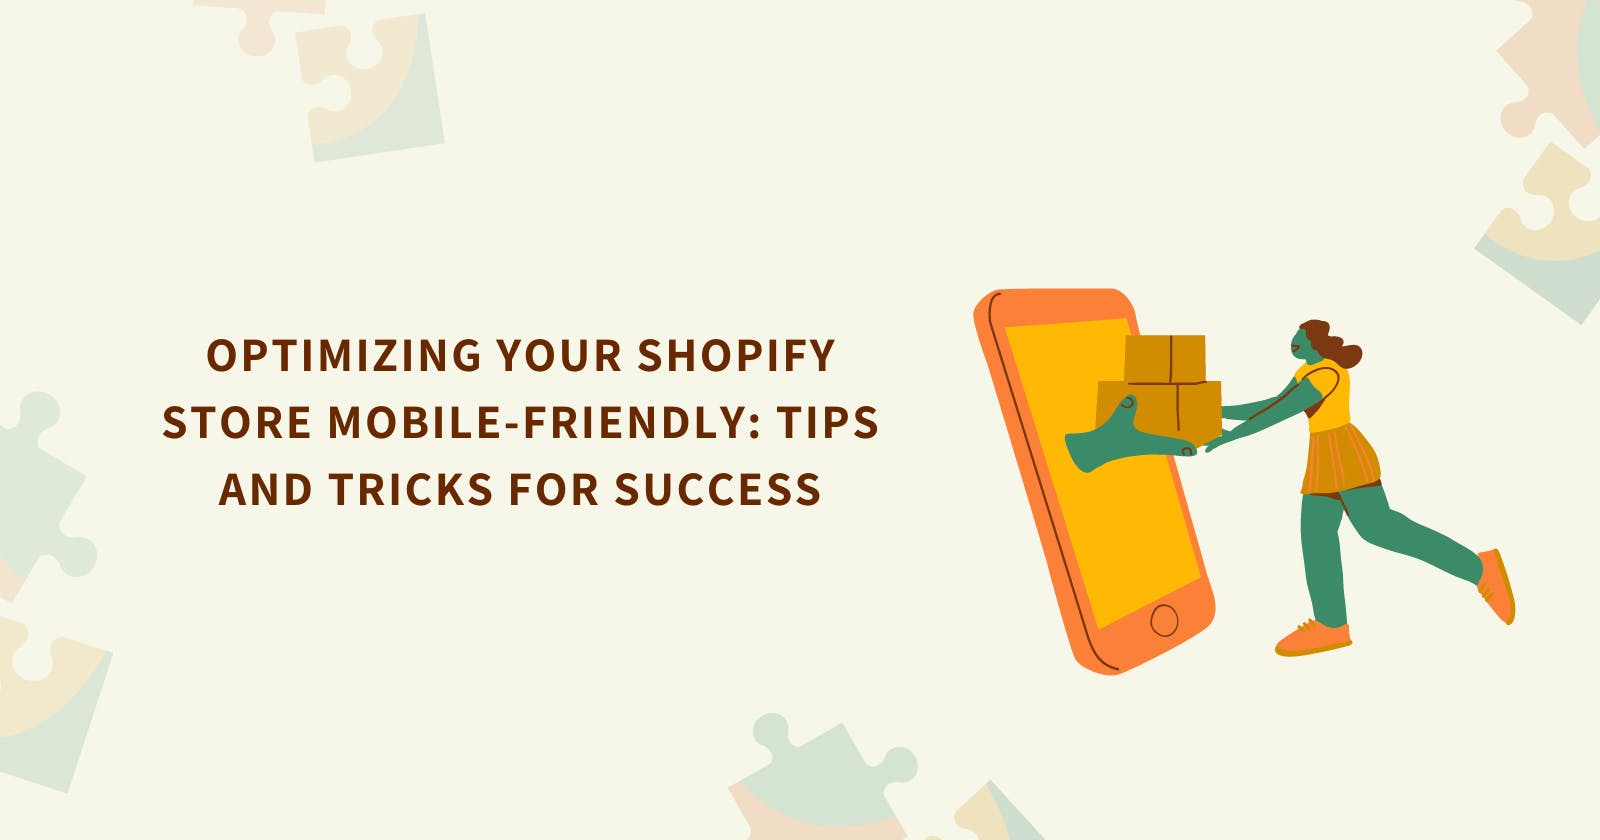 Optimizing Your Shopify Store Mobile-friendly: Tips and Tricks for Success